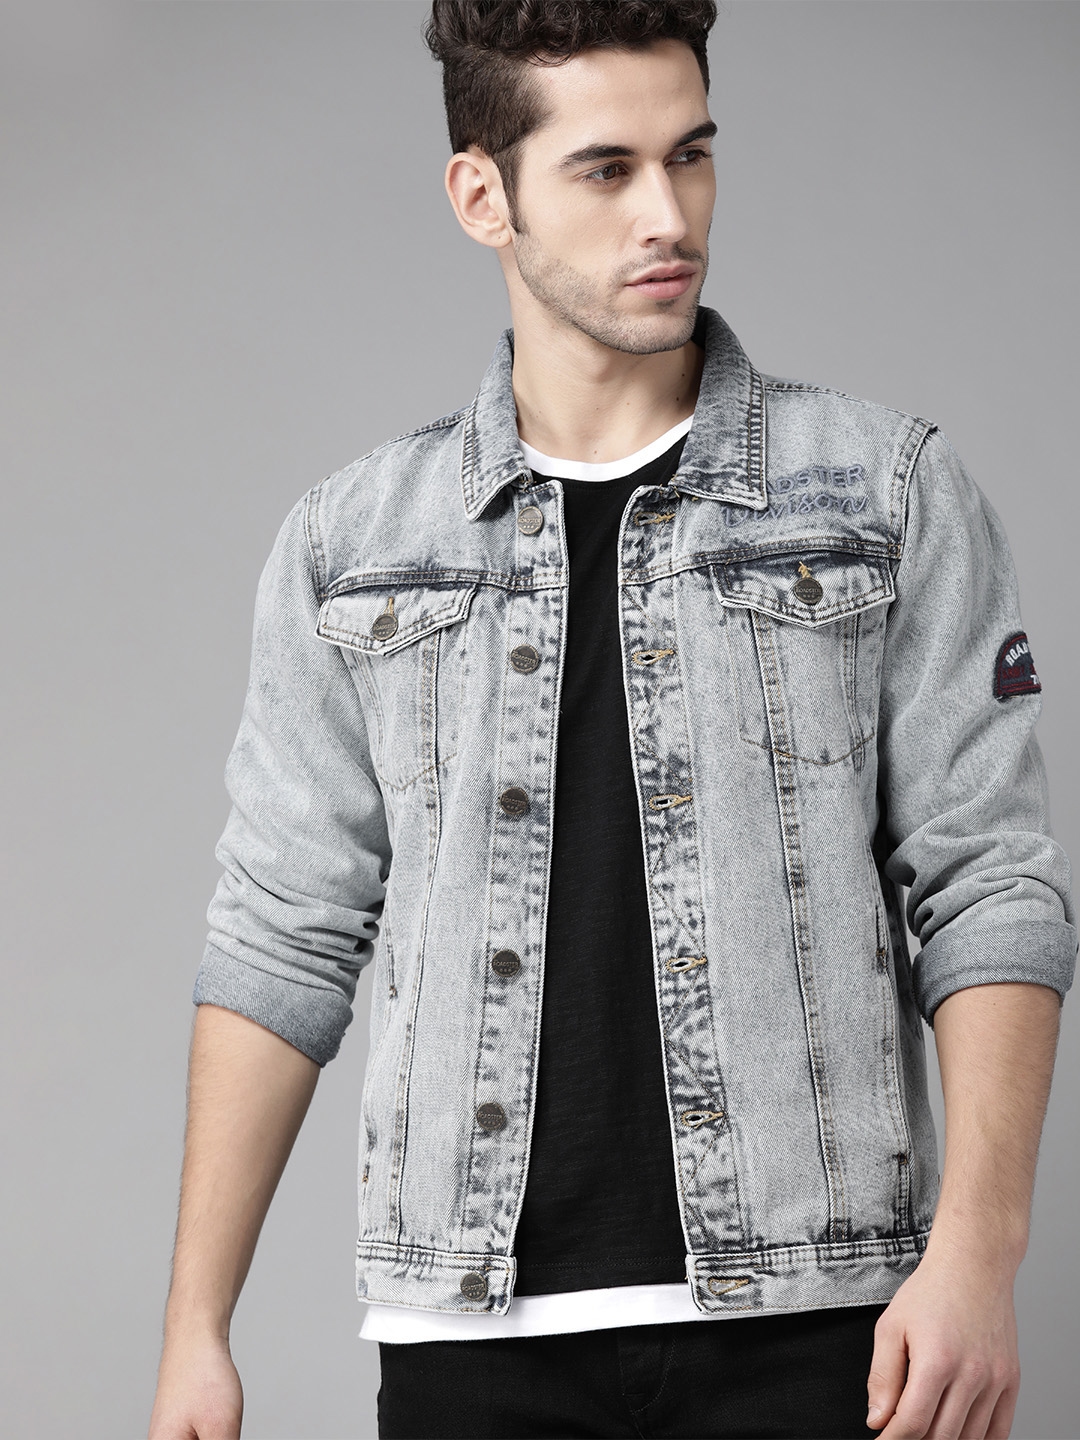 Experience more than 119 washed denim jacket mens super hot